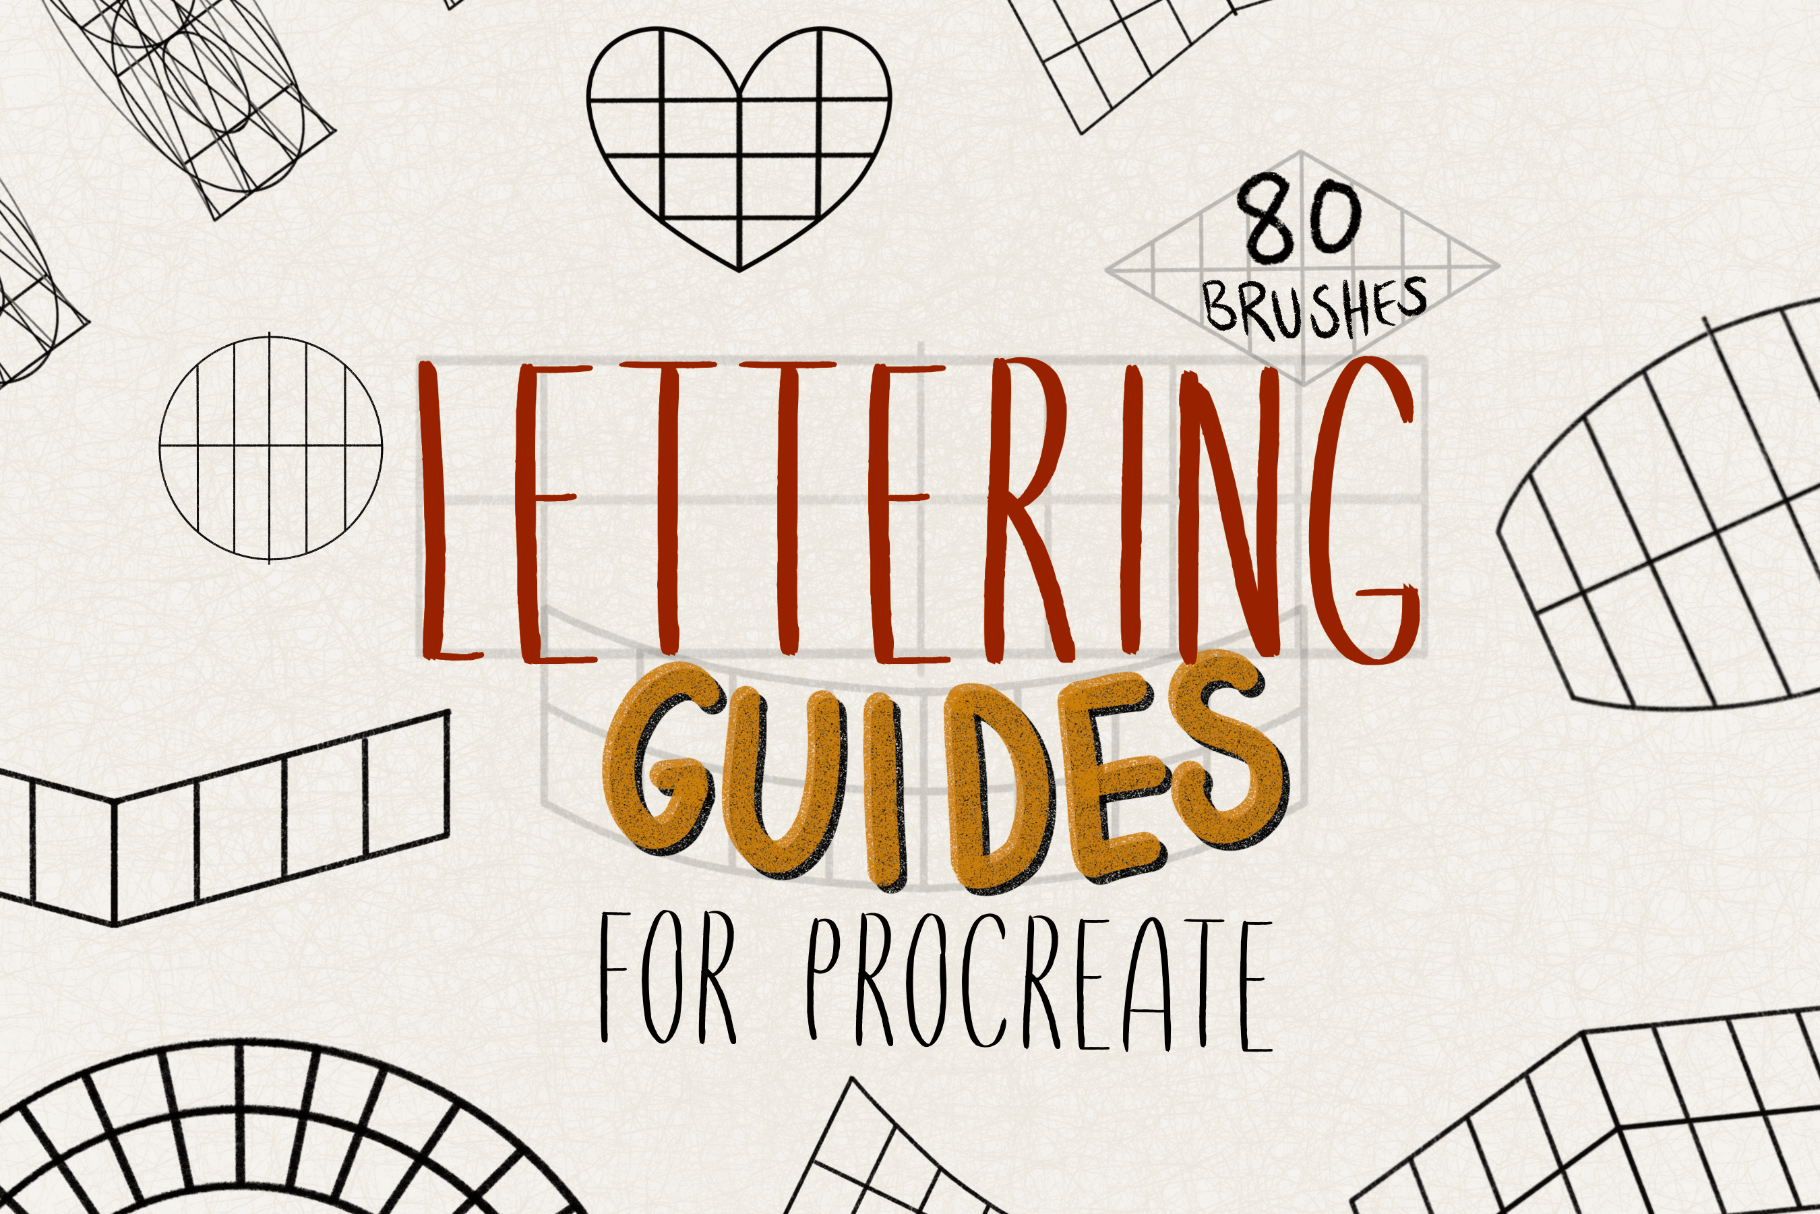 Procreate Lettering Guides 80 Brushes